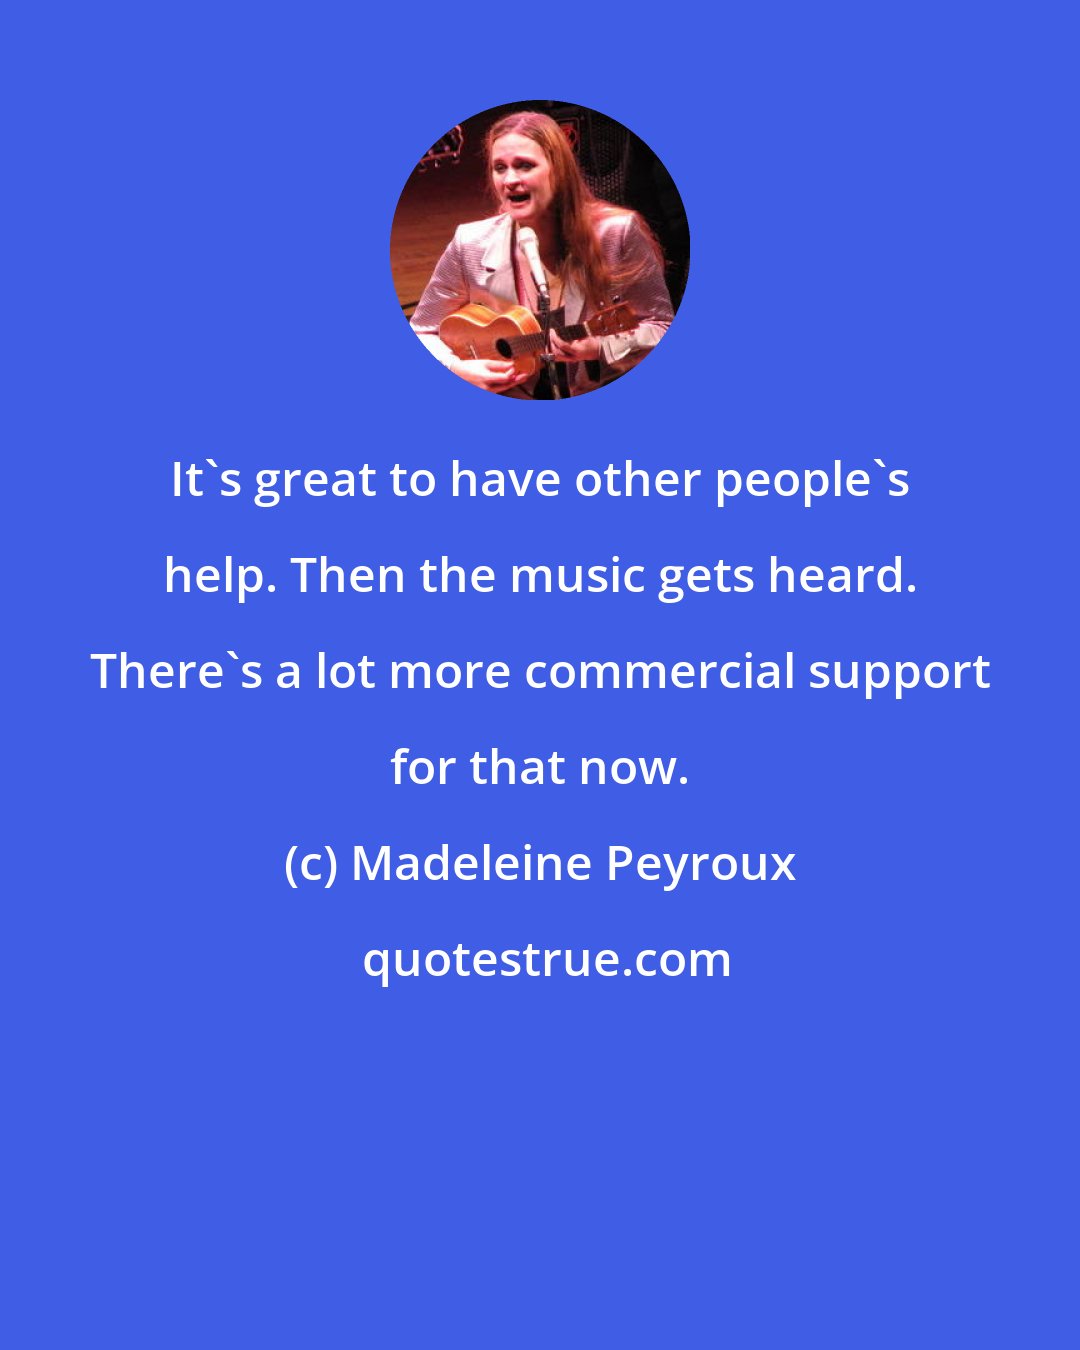 Madeleine Peyroux: It's great to have other people's help. Then the music gets heard. There's a lot more commercial support for that now.